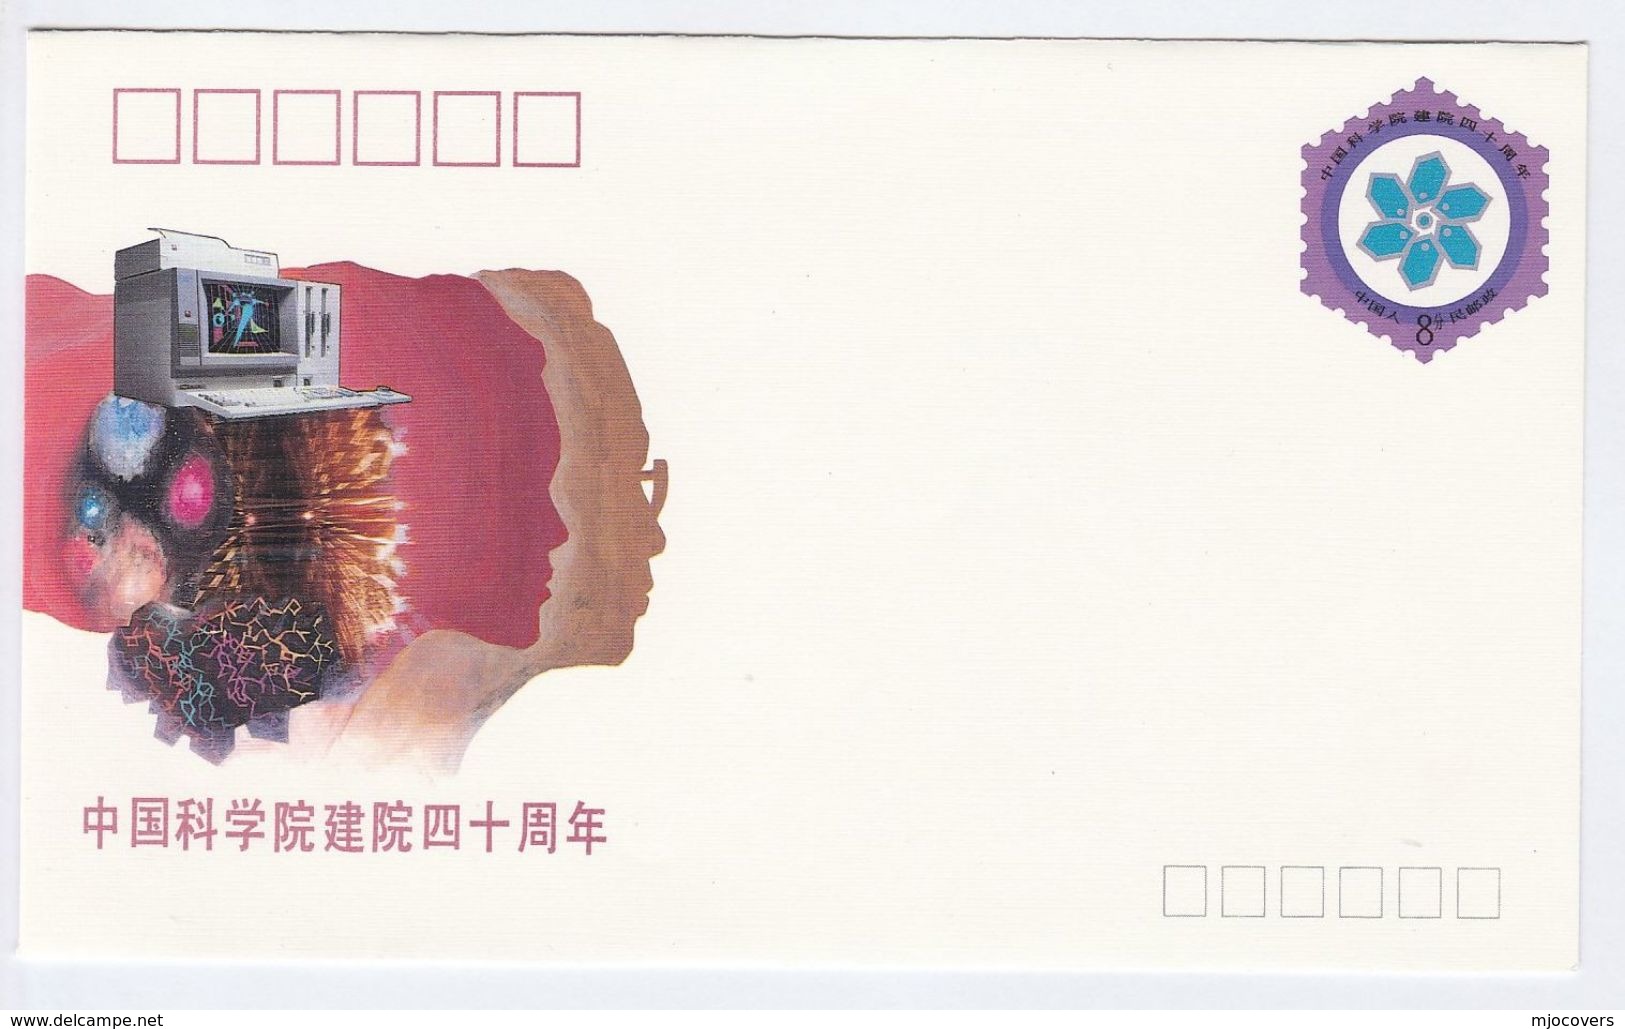 1989 CHINA Postal STATIONERY COVER Illus SCIENCE ACADEMY Mentions ASTRONOMY PHYSICS CHEMISTRY BIOLOGY MATHEMATICS Stamp - Astronomy